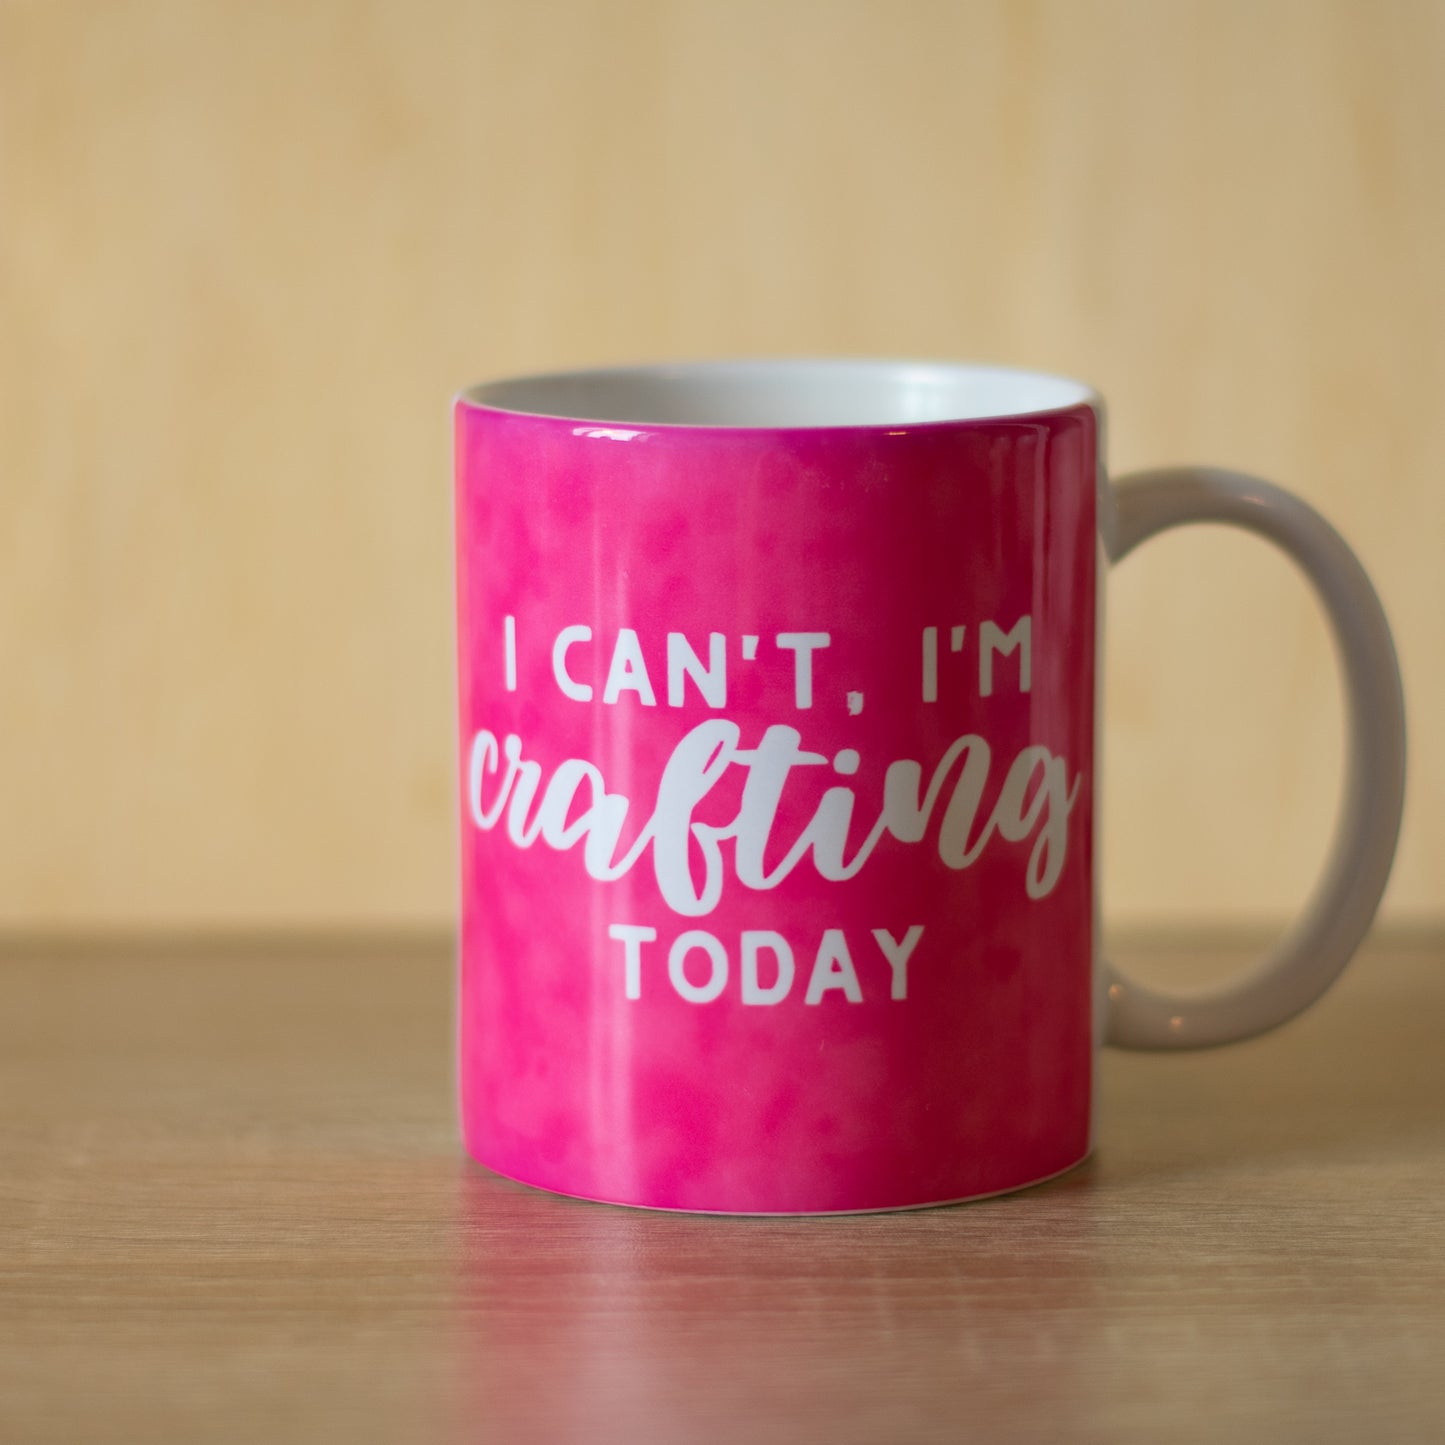 I can't, I'm crafting today | 12oz